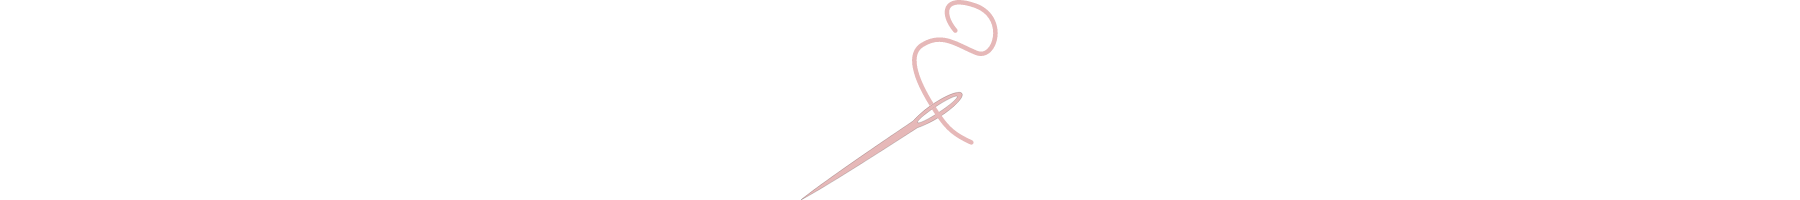 Pink needle and thread graphic.